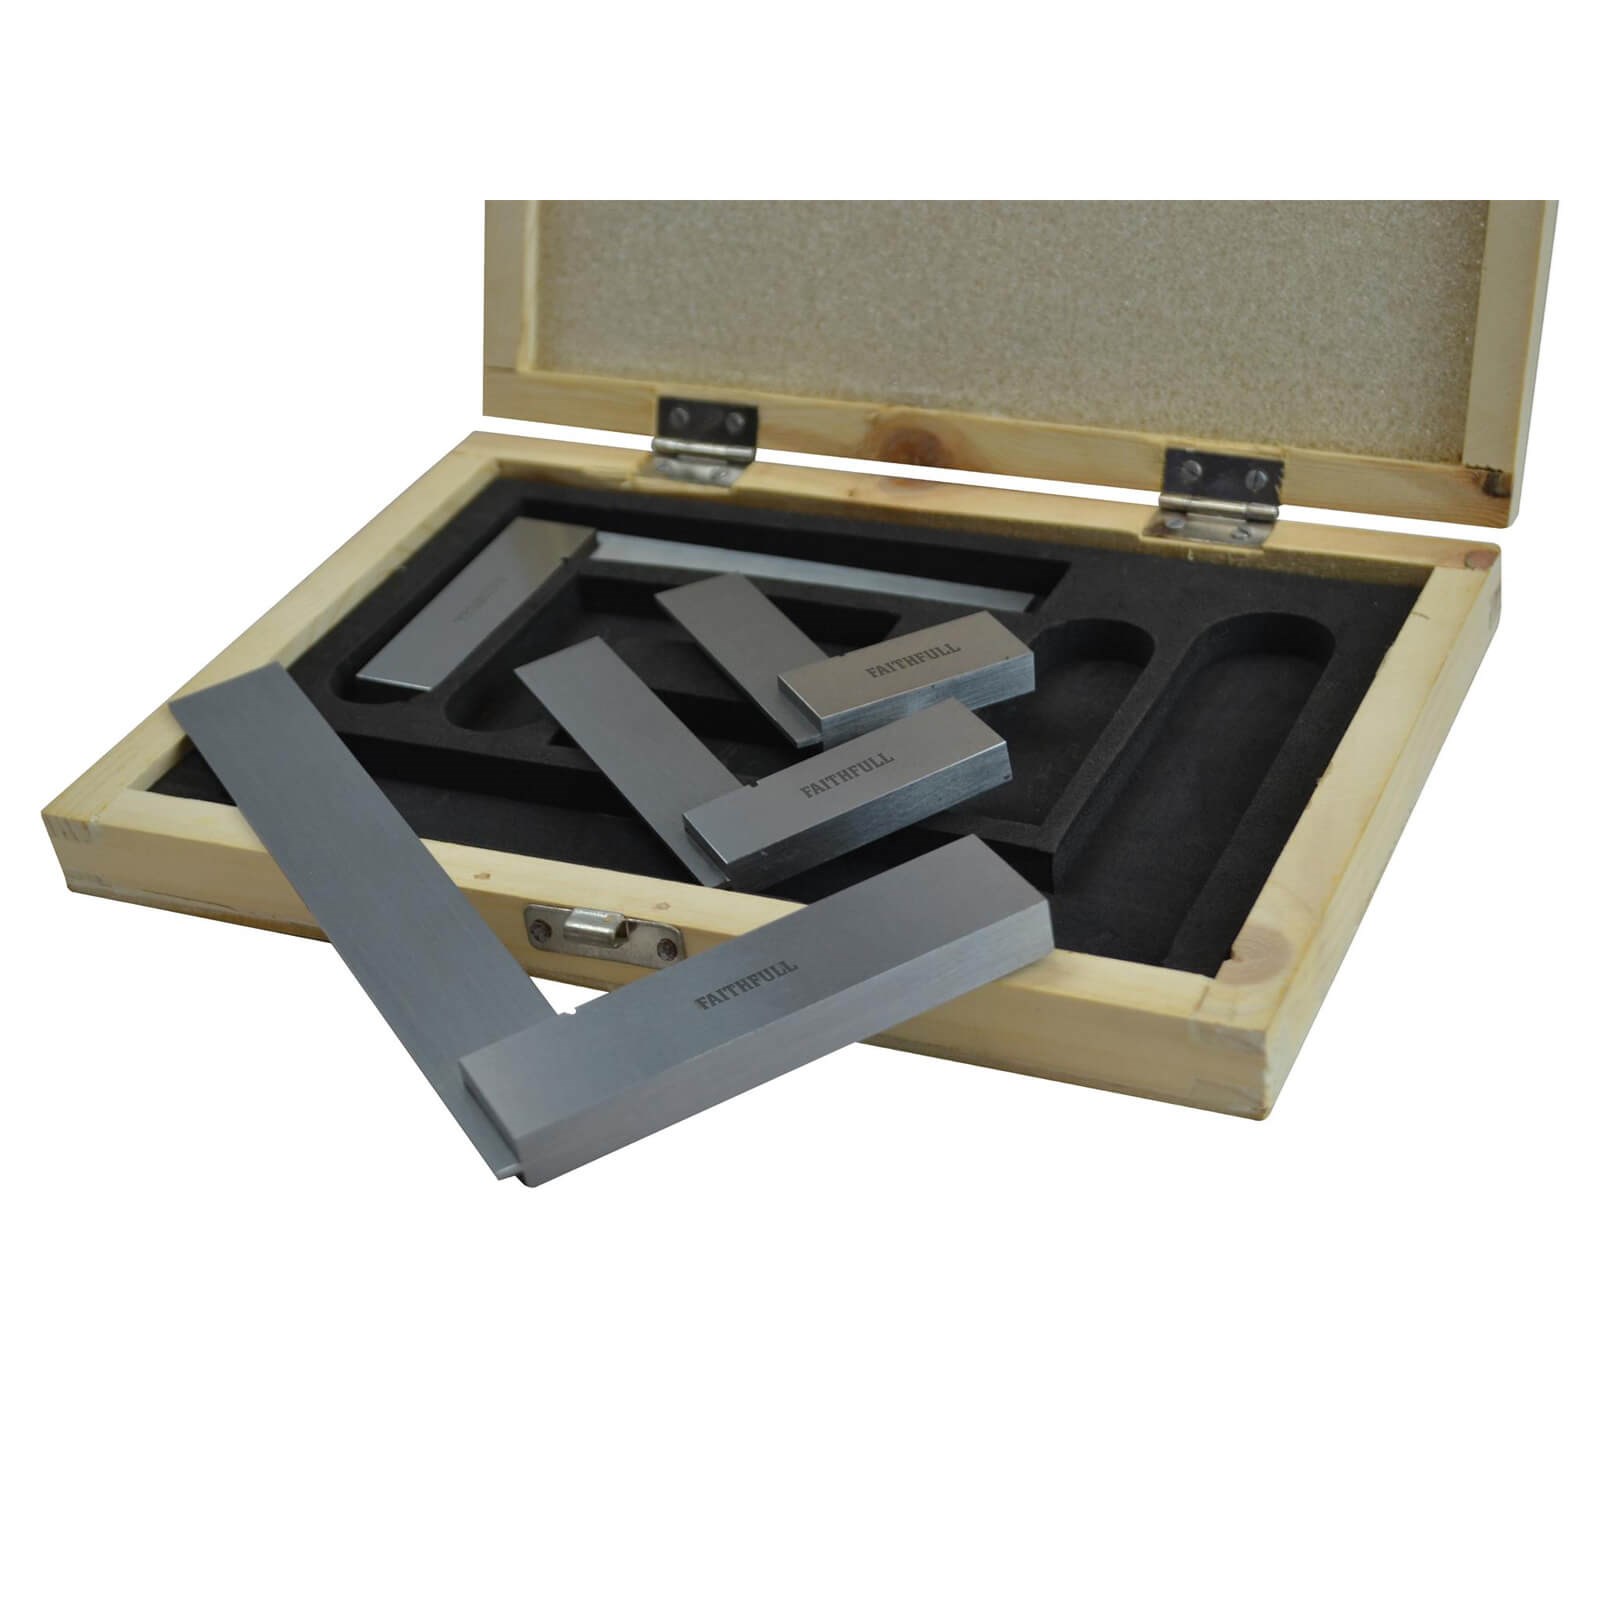 IN STORAGE CASE FAITHFULL 4 PIECE ENGINEERS SQUARE SET 50, 75,100 & 150mm